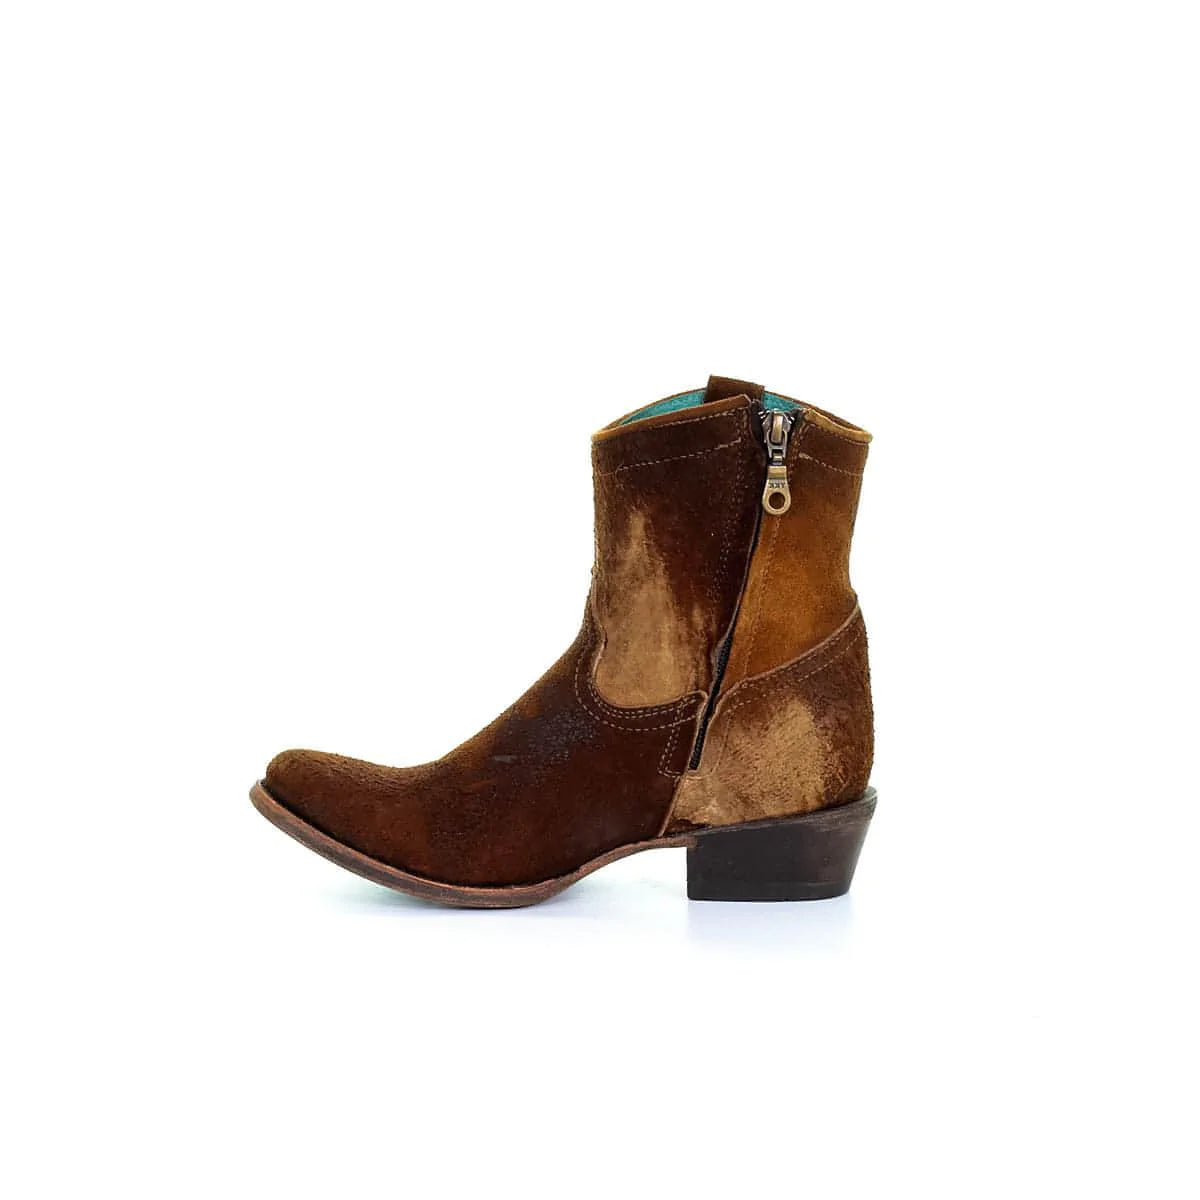 CORRAL WOMEN'S LAMB ABSTRACT BOOTS - ROUND TOE C1064